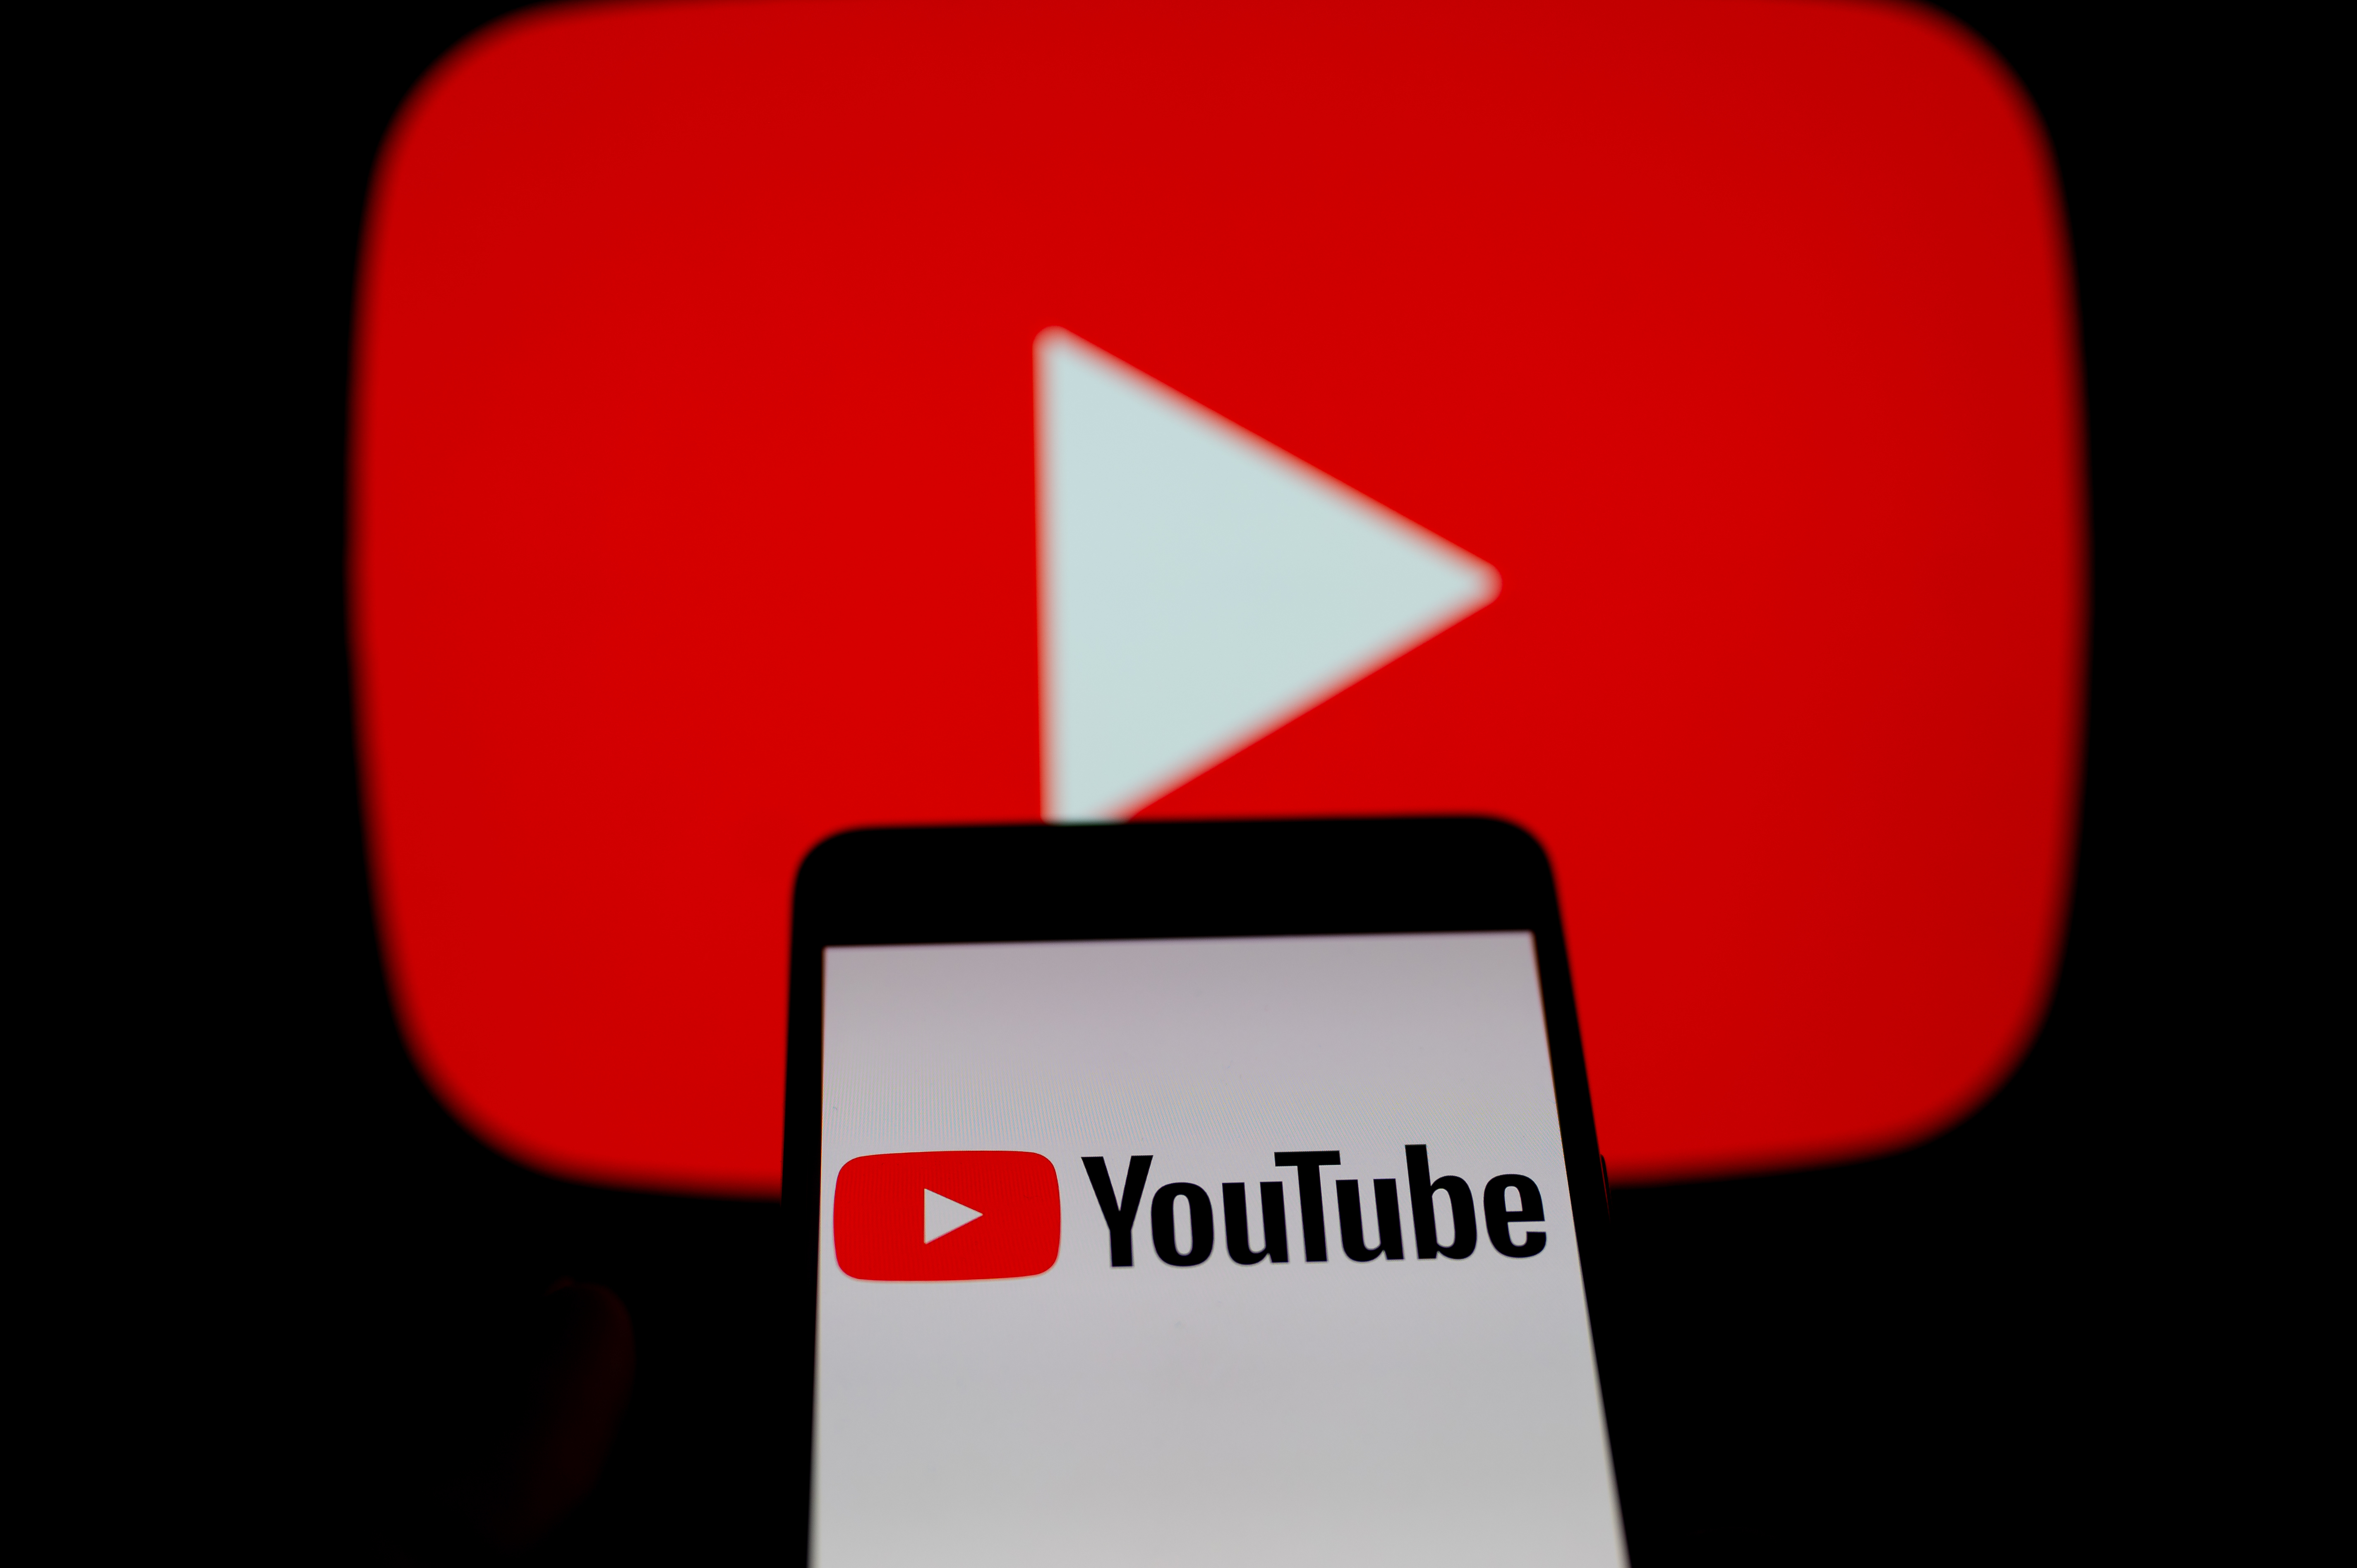 YouTube’s move citing India's poll body on EVM coverage raises concerns